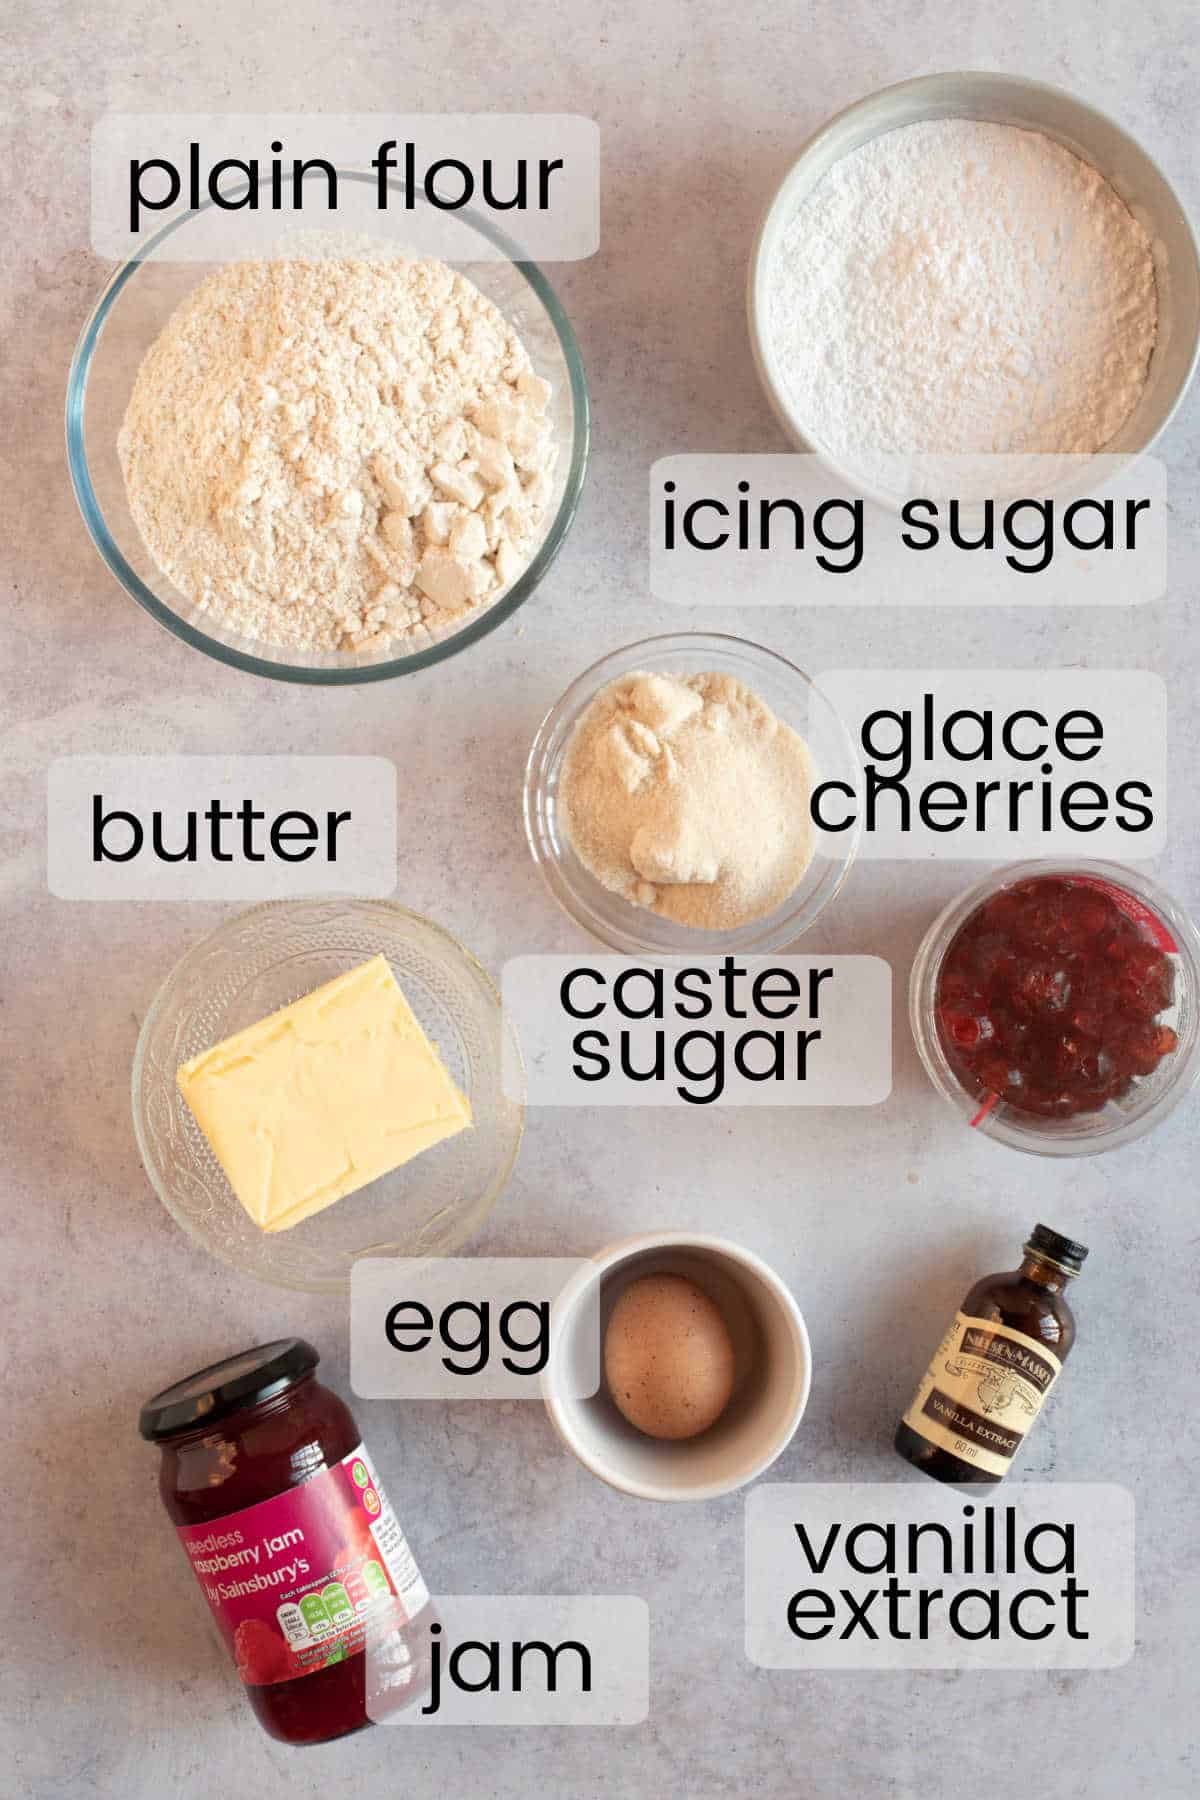 Ingredients for Empire biscuits.